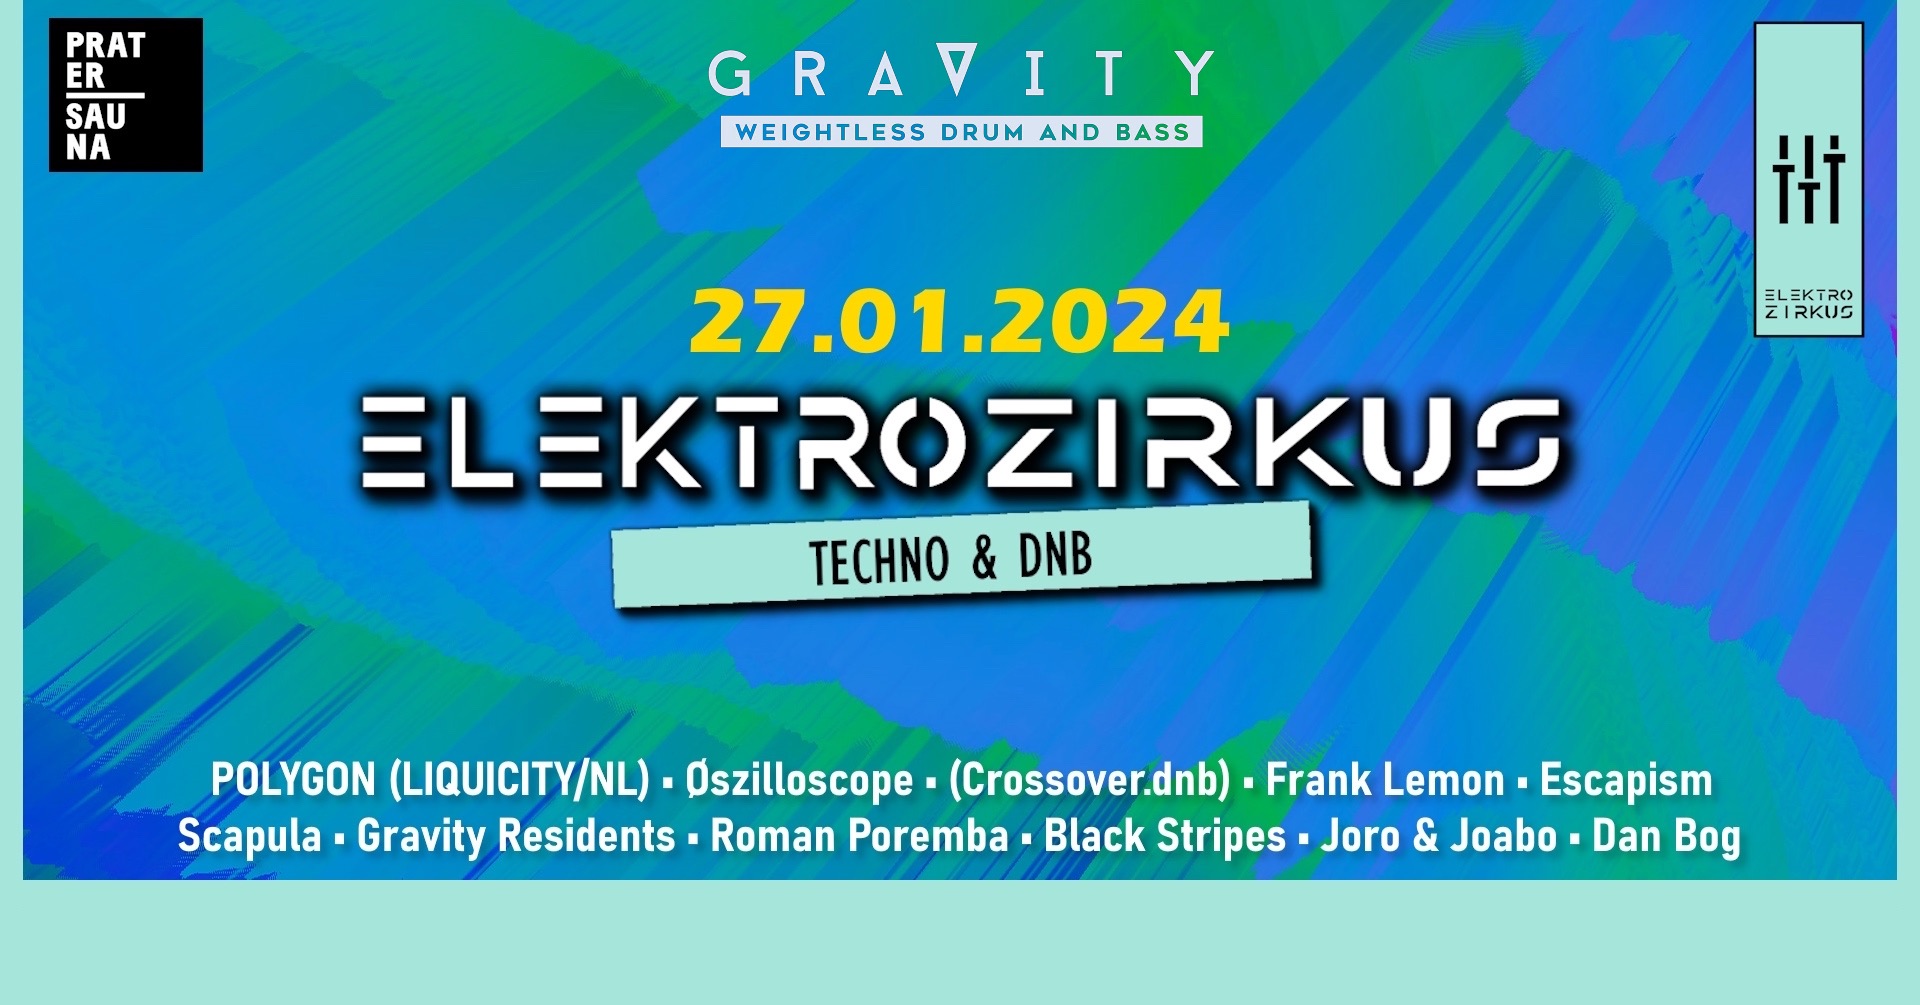 Drum and Bass is back. Gravity in Vienna at Pratersauna on Saturday, 27.01.2024